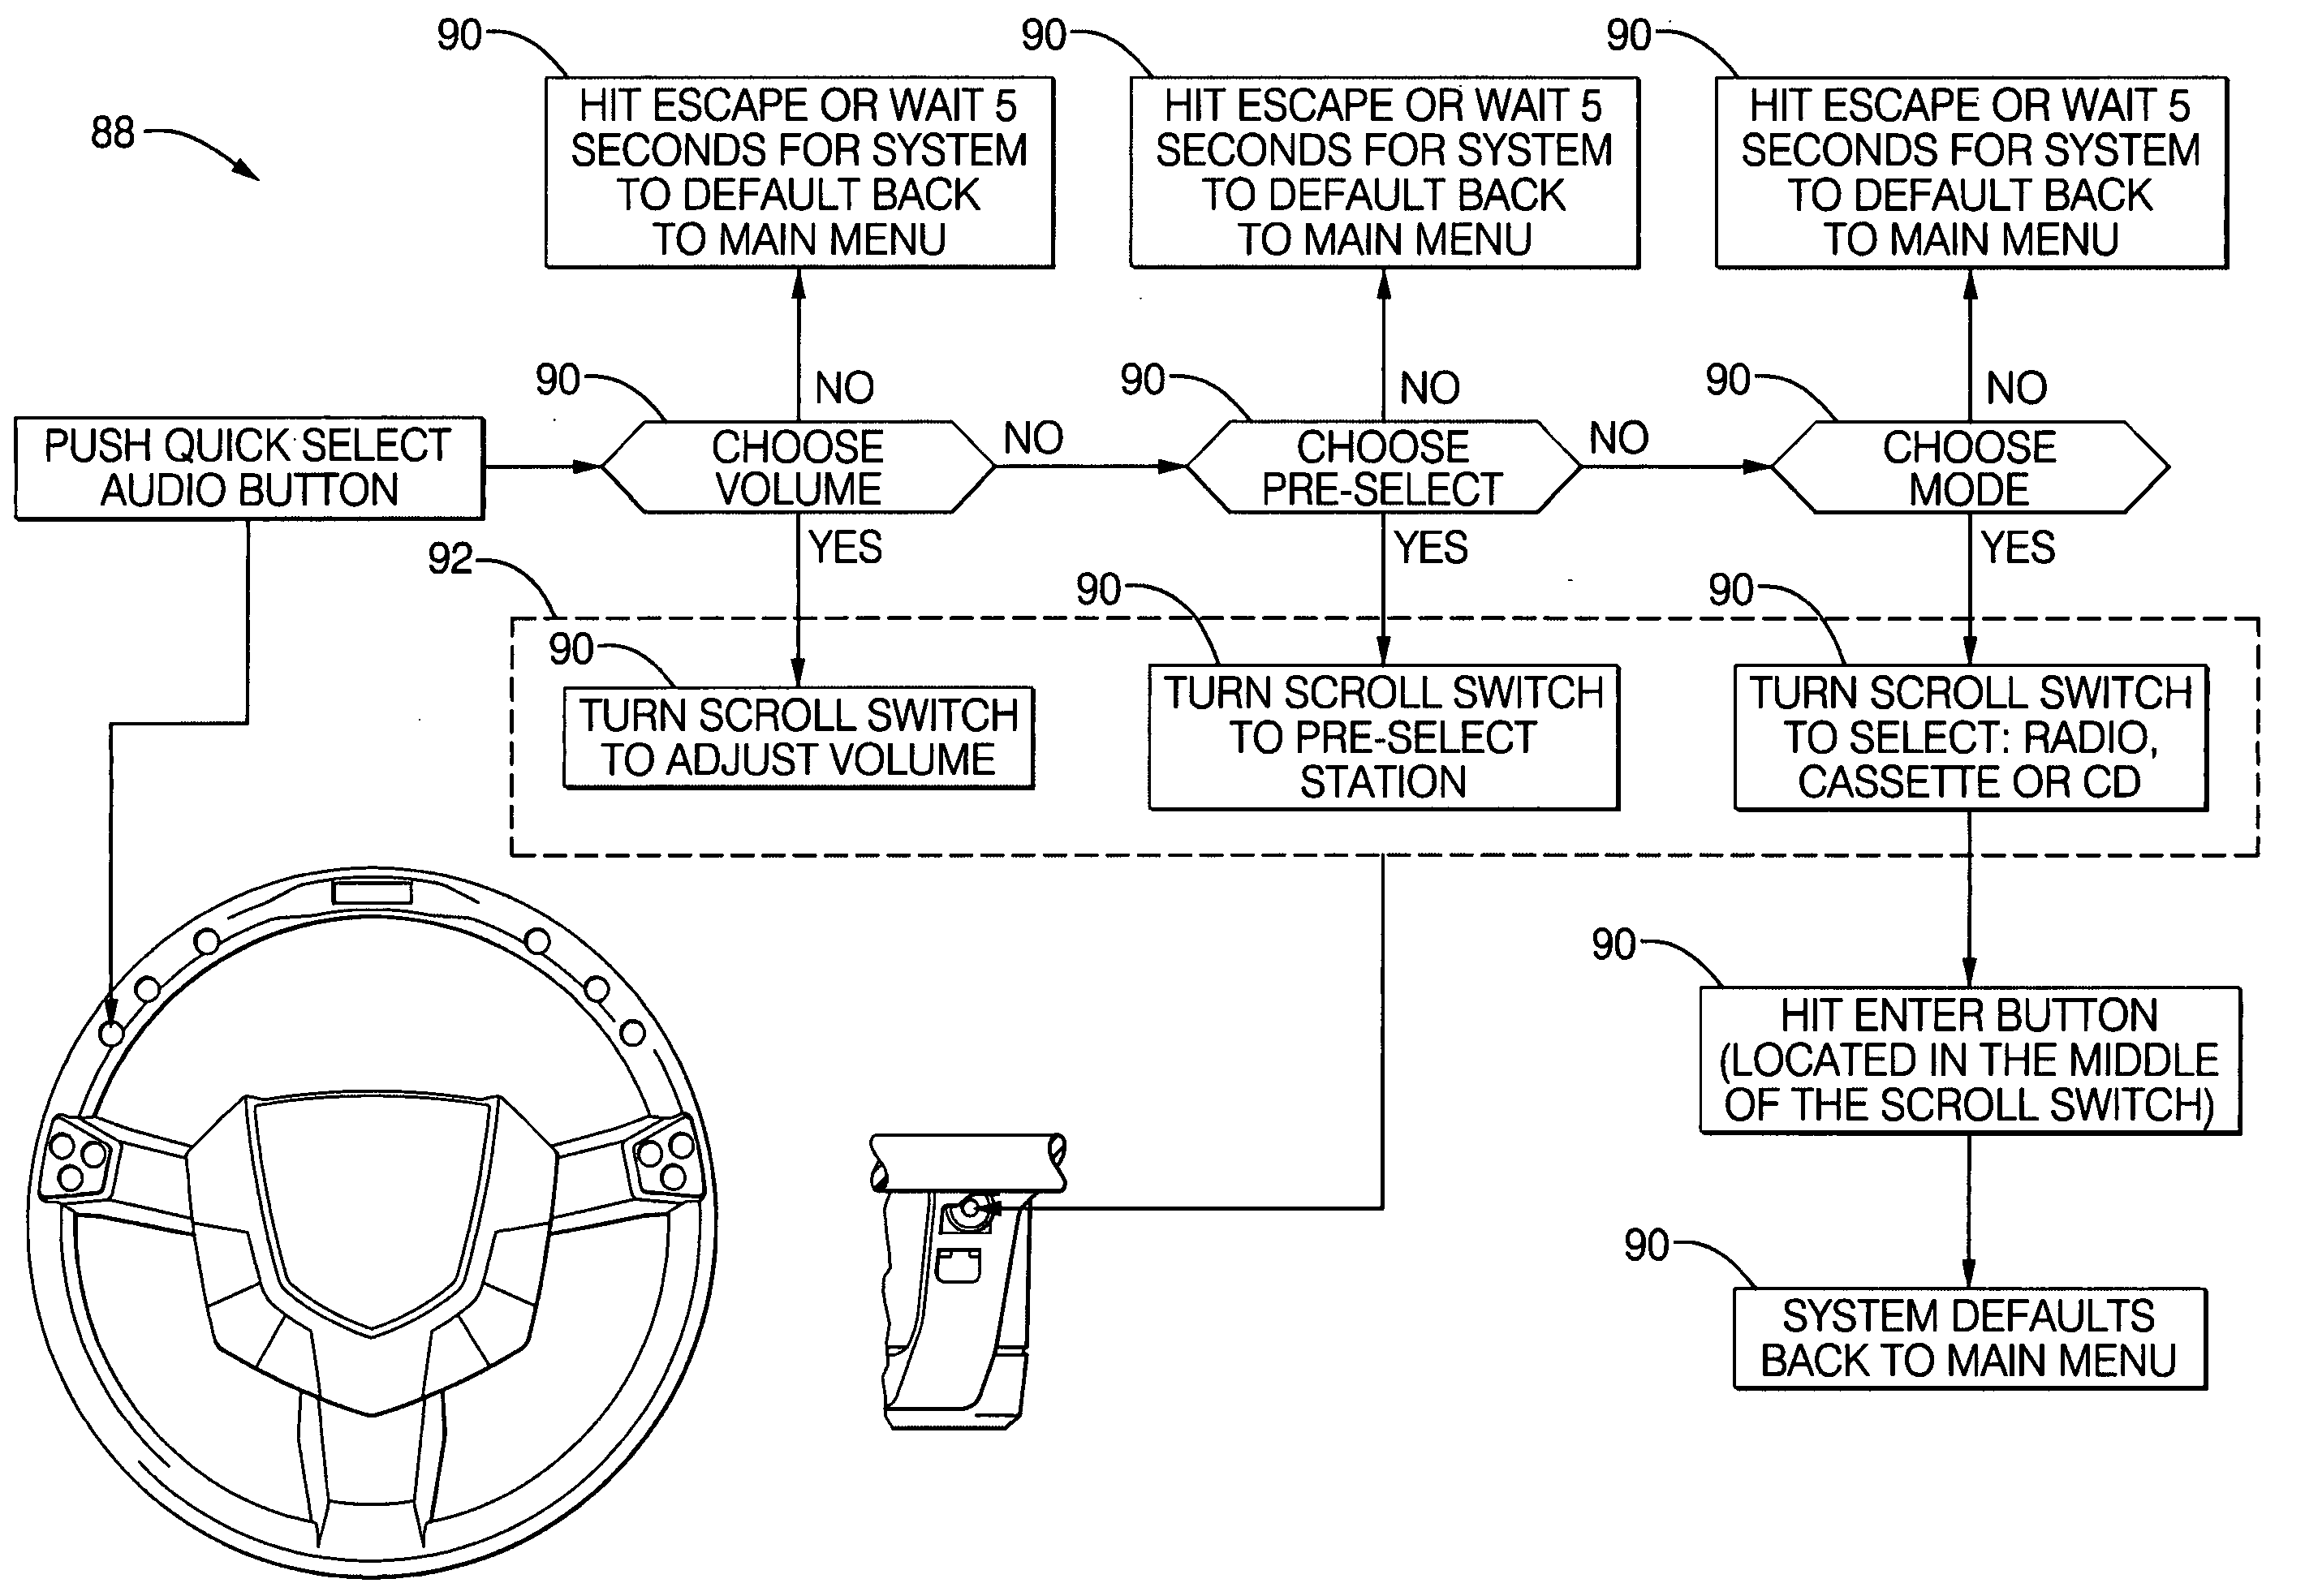 Method and apparatus for accessing vehicle systems